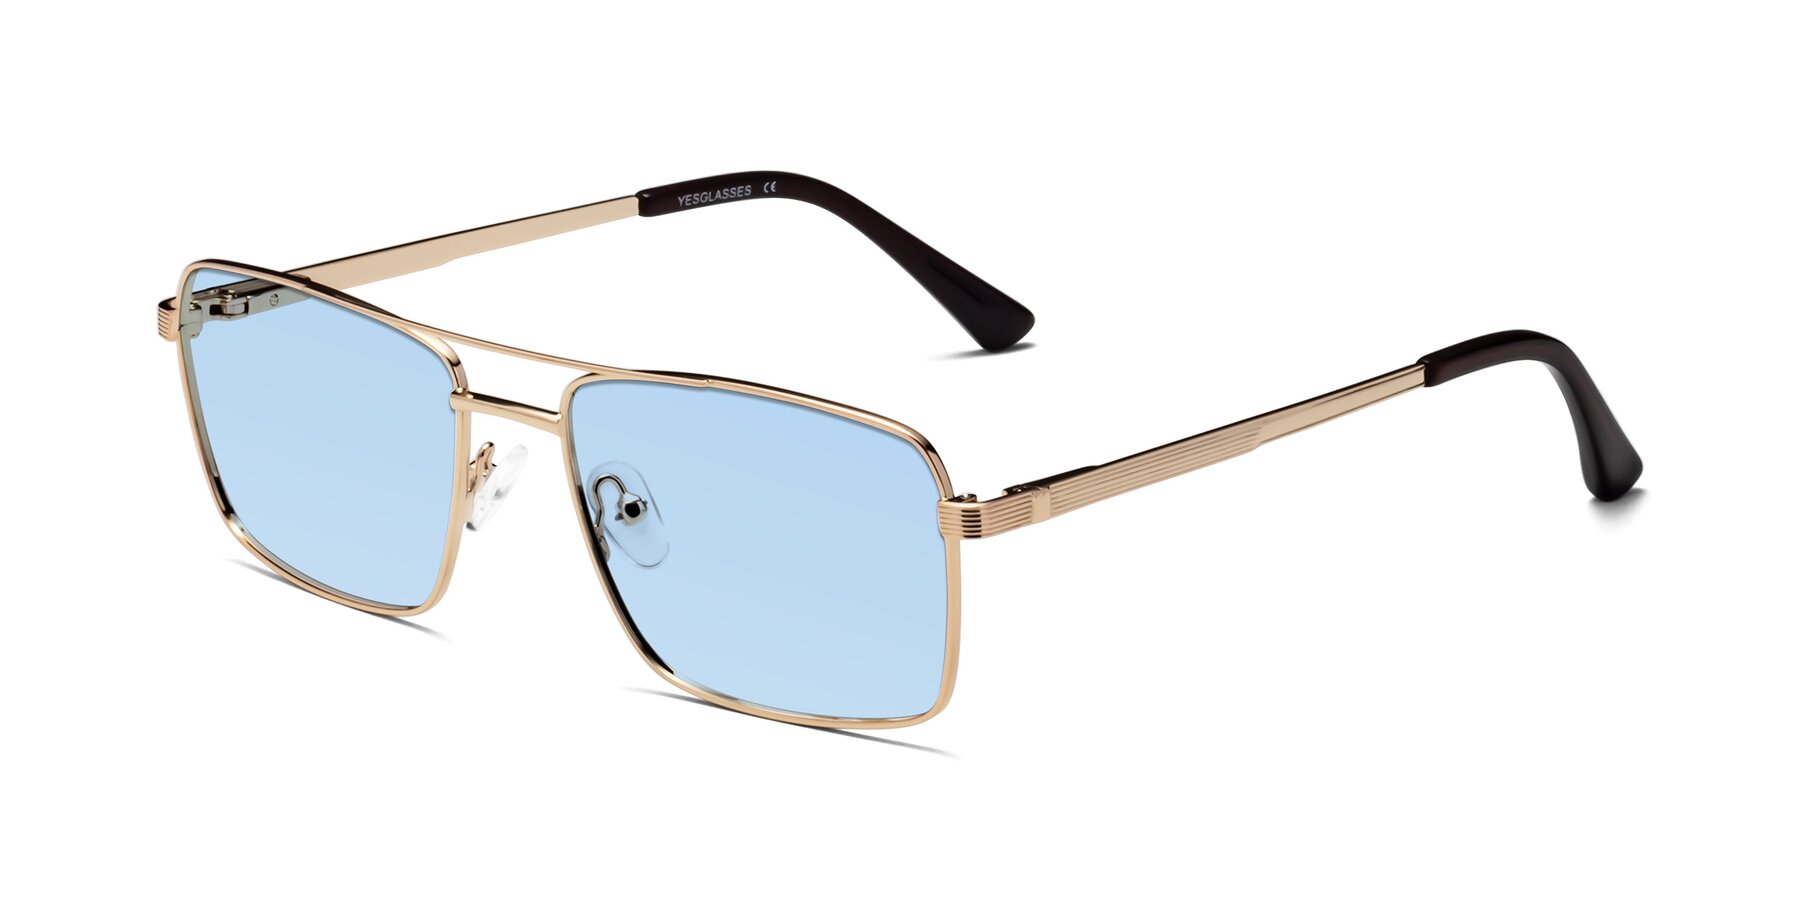 Angle of Beckum in Gold with Light Blue Tinted Lenses